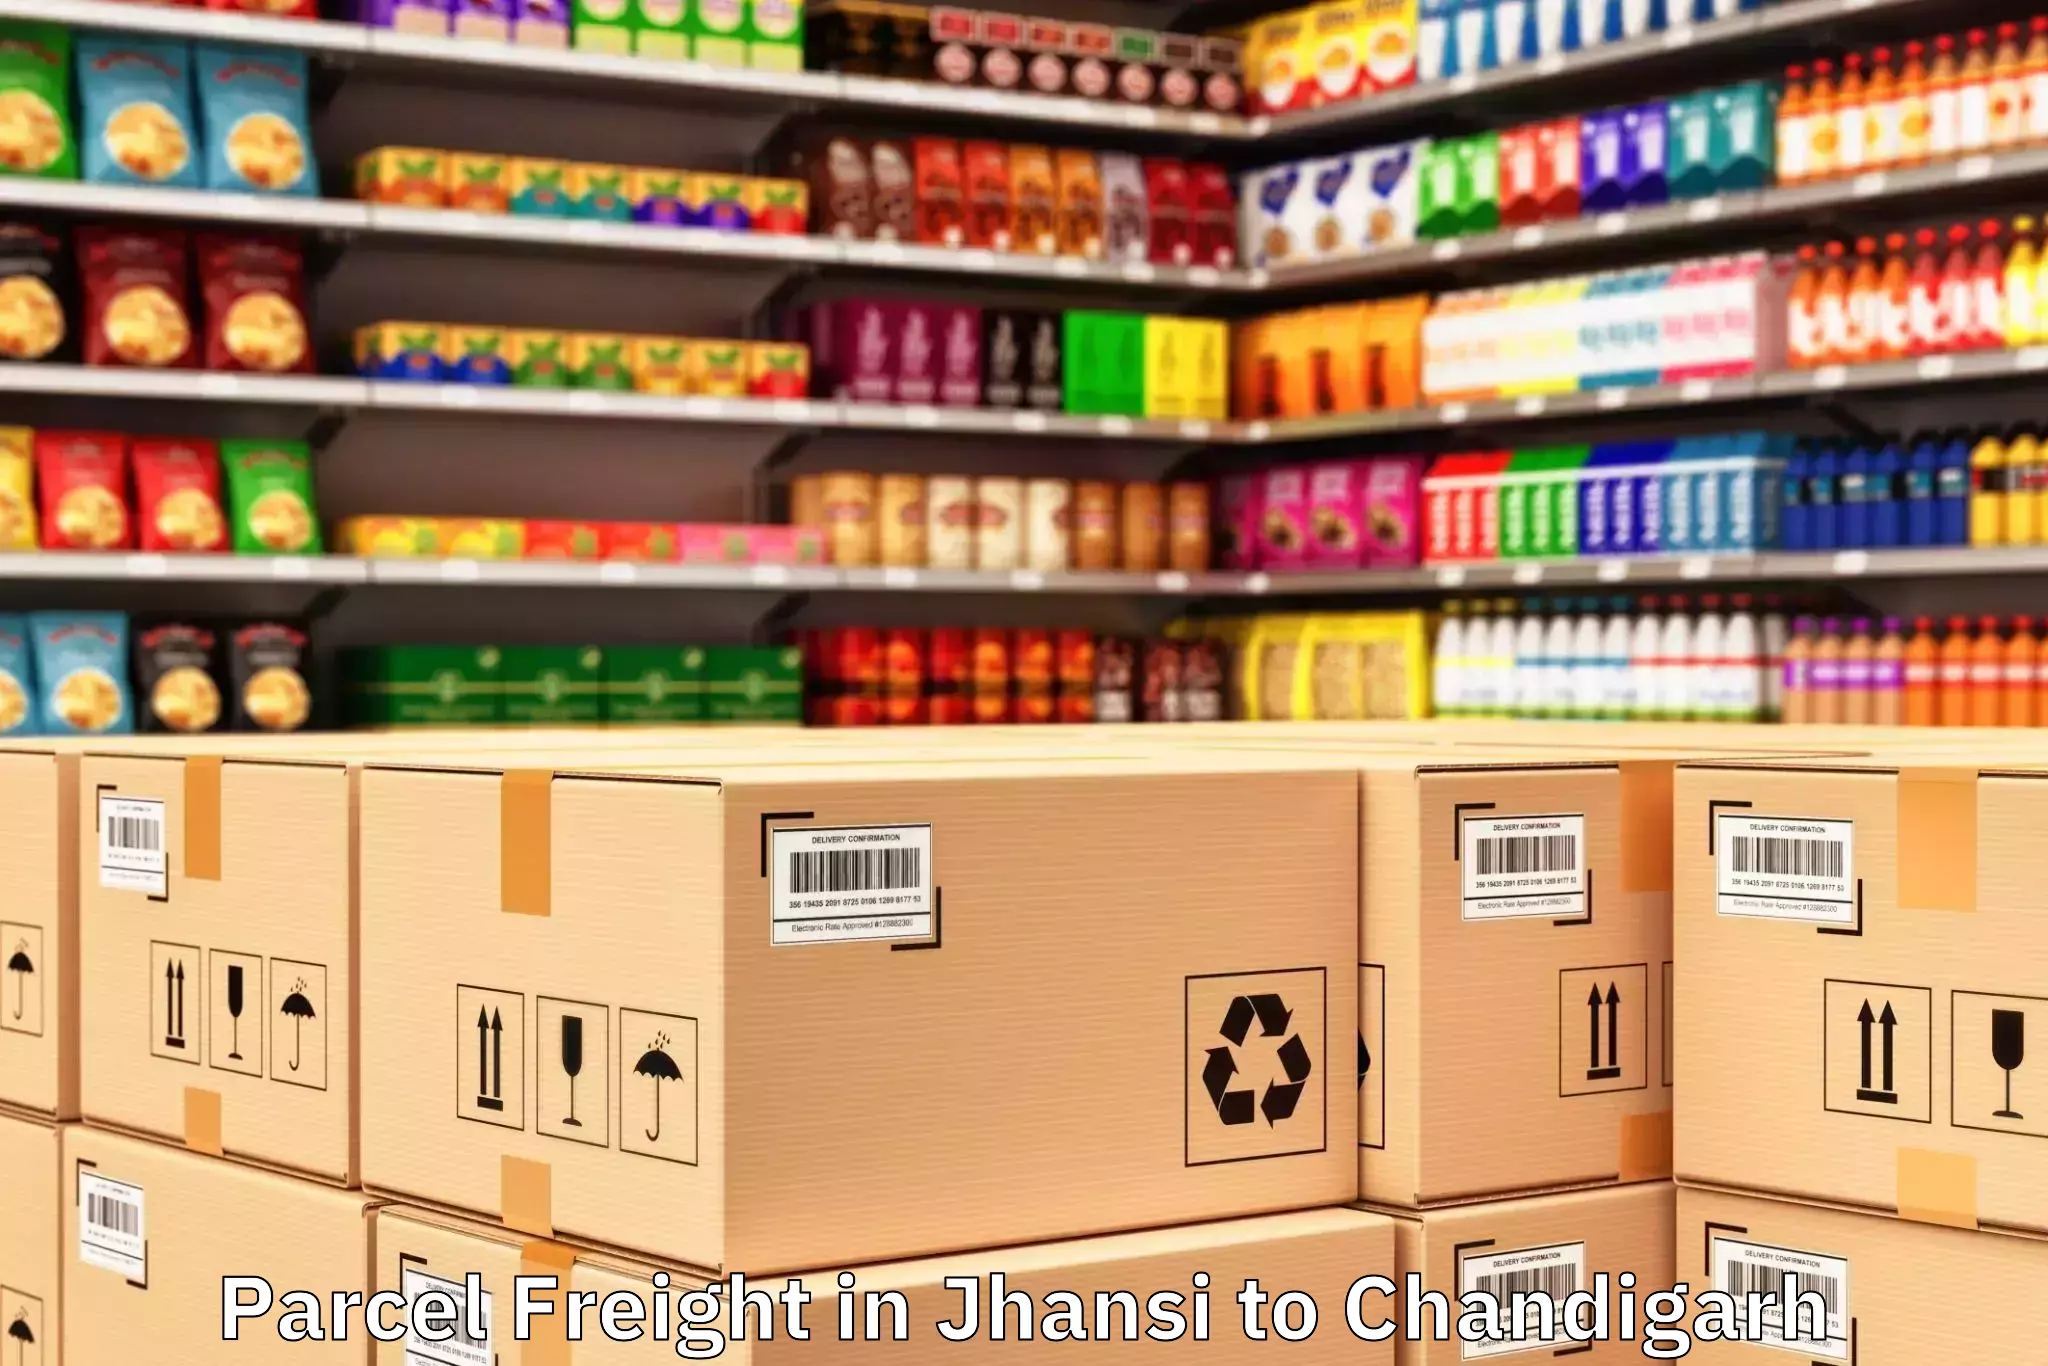 Reliable Jhansi to Chandigarh Parcel Freight